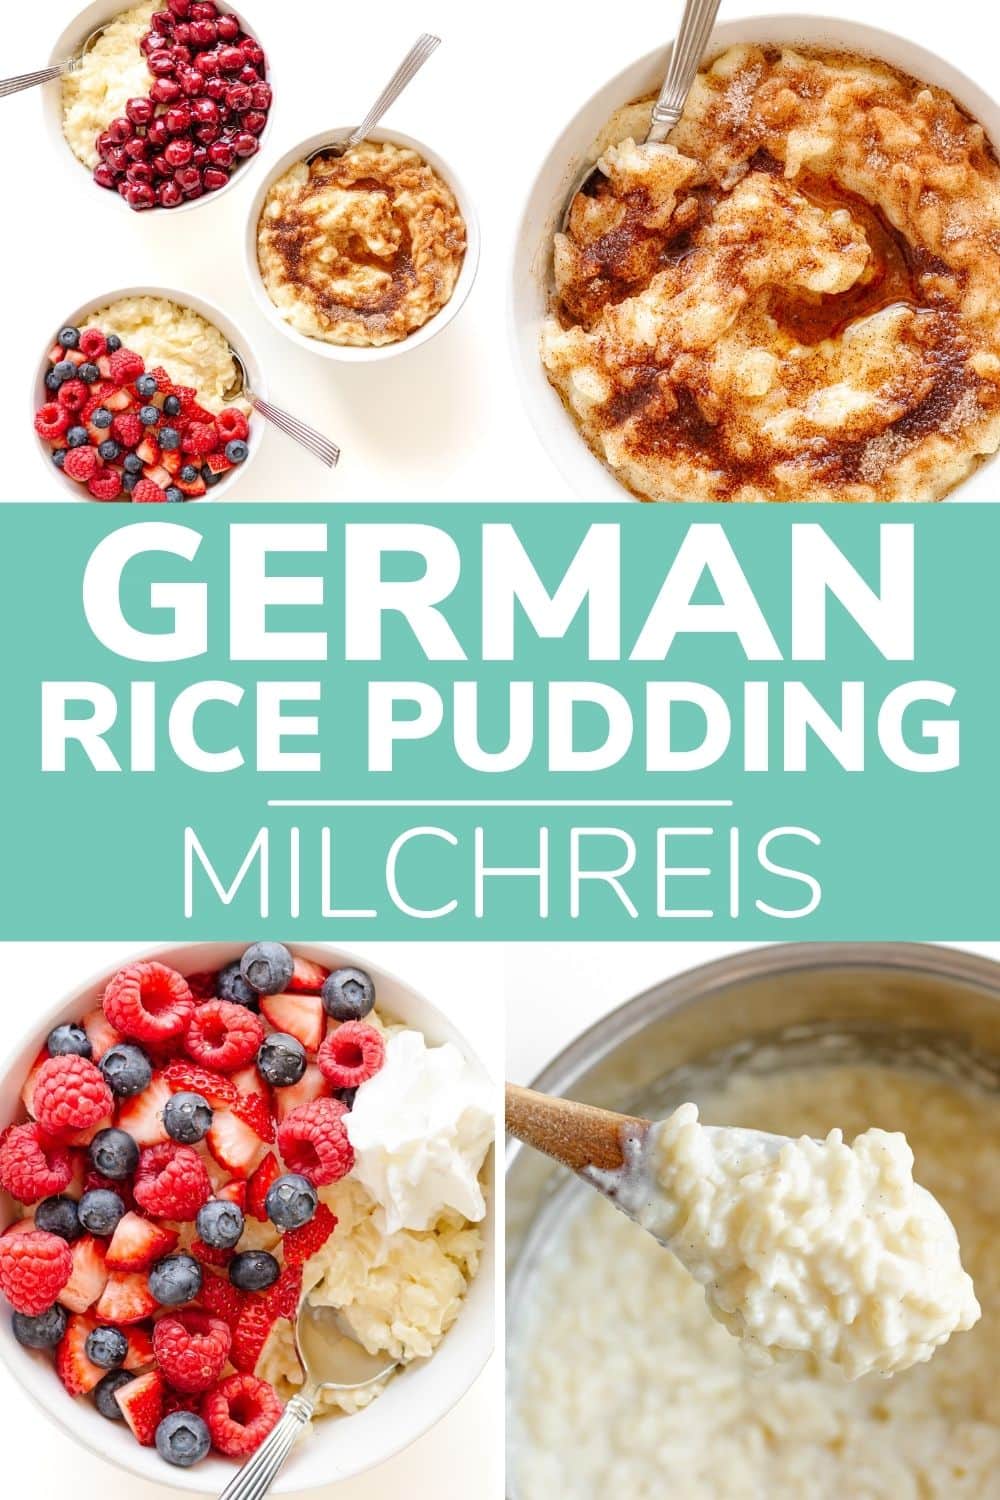 Collage graphic featuring pictures of rice pudding with text overlay "German Rice Pudding - Milchreis".